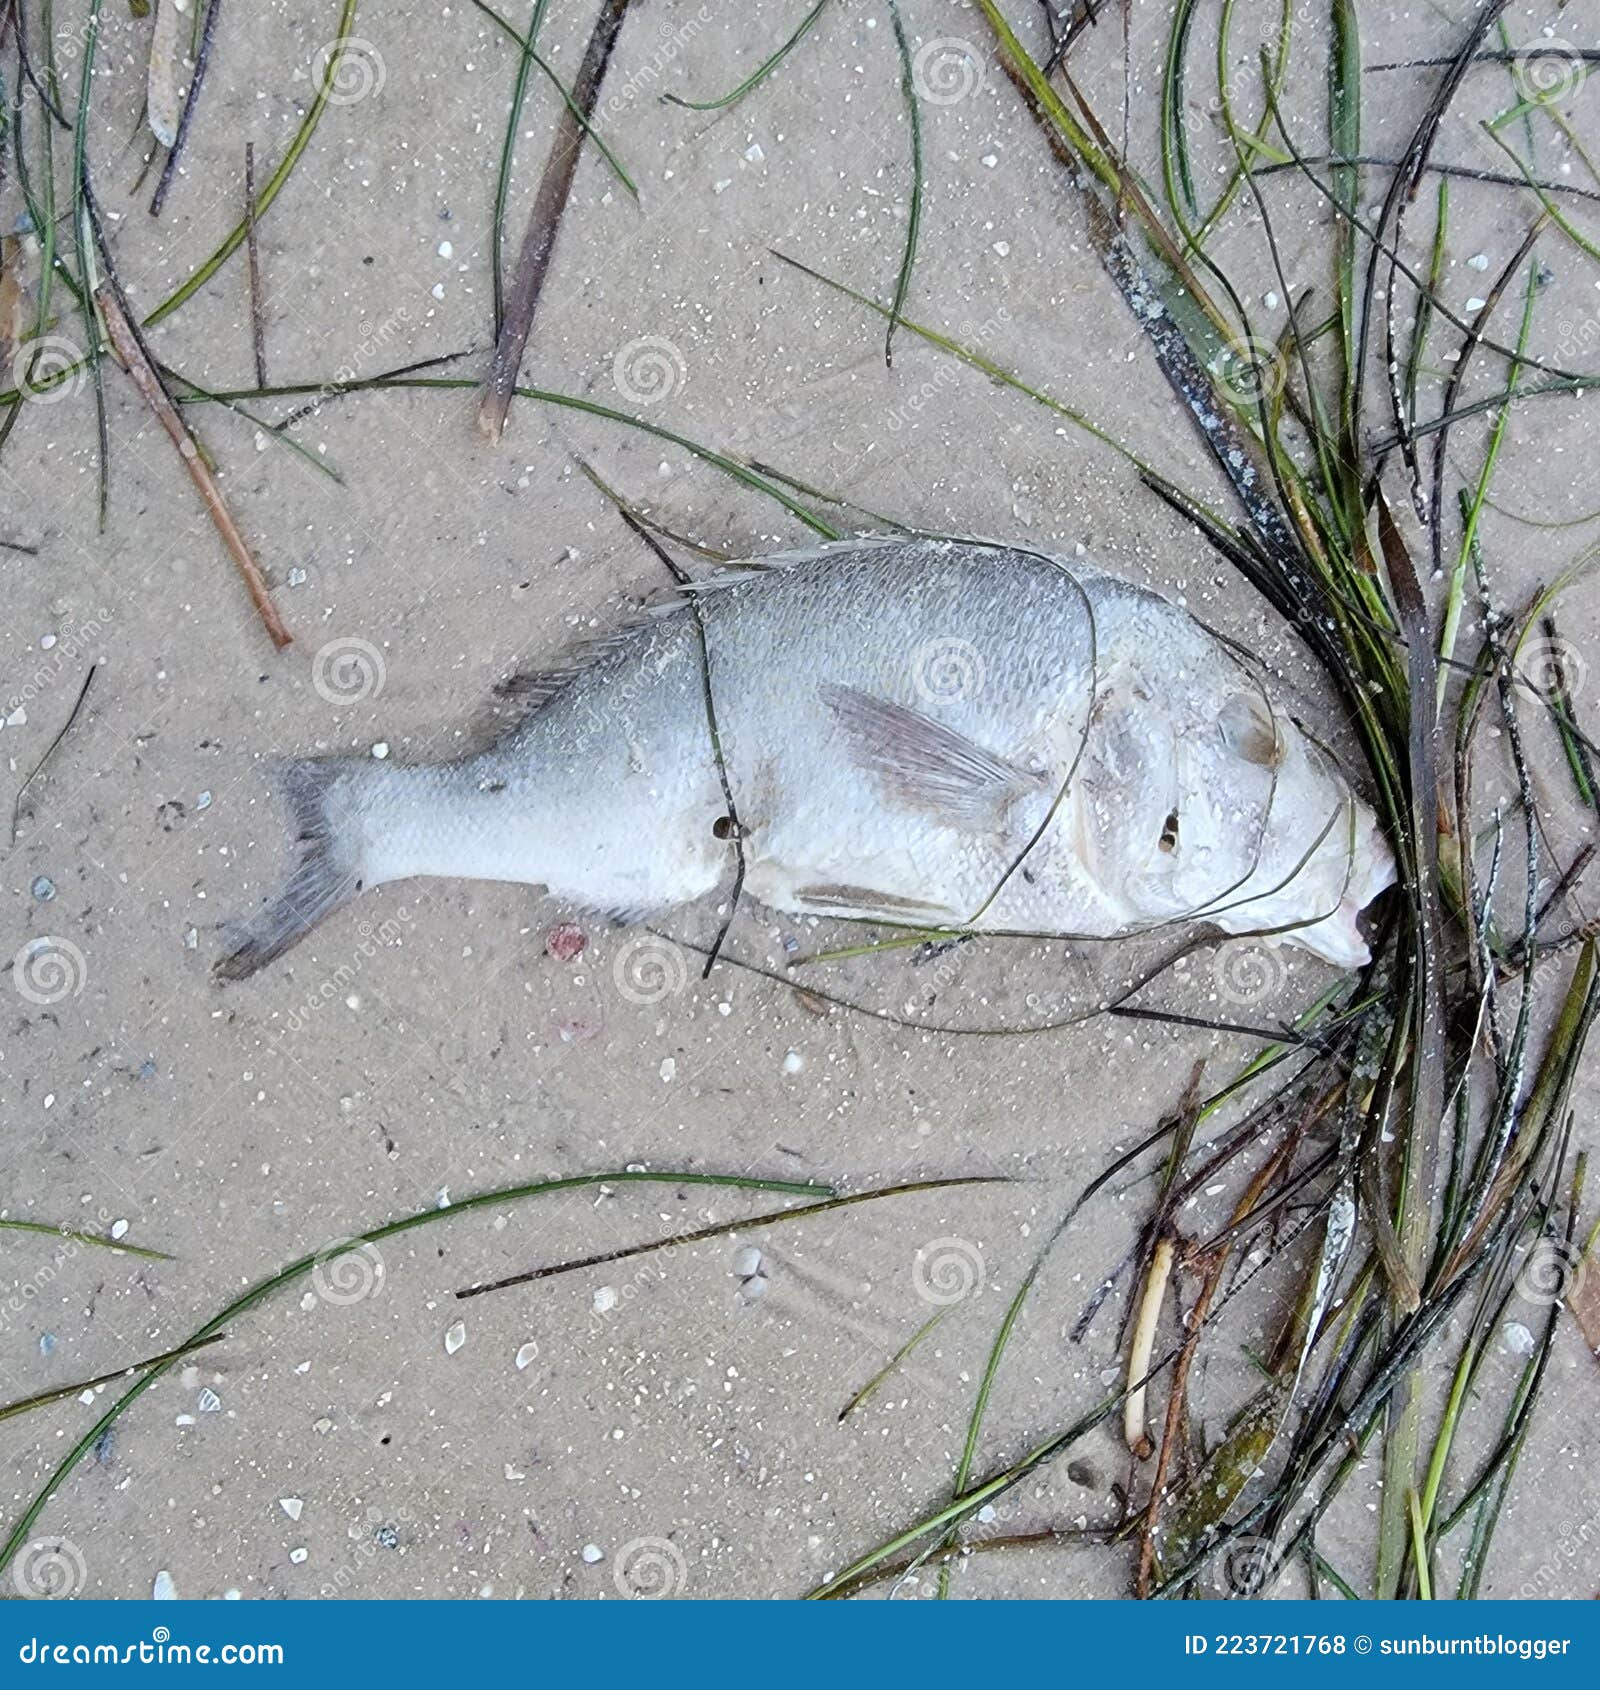 Red Tide Dead Fish in Florida Stock Photo Image of animal, plant